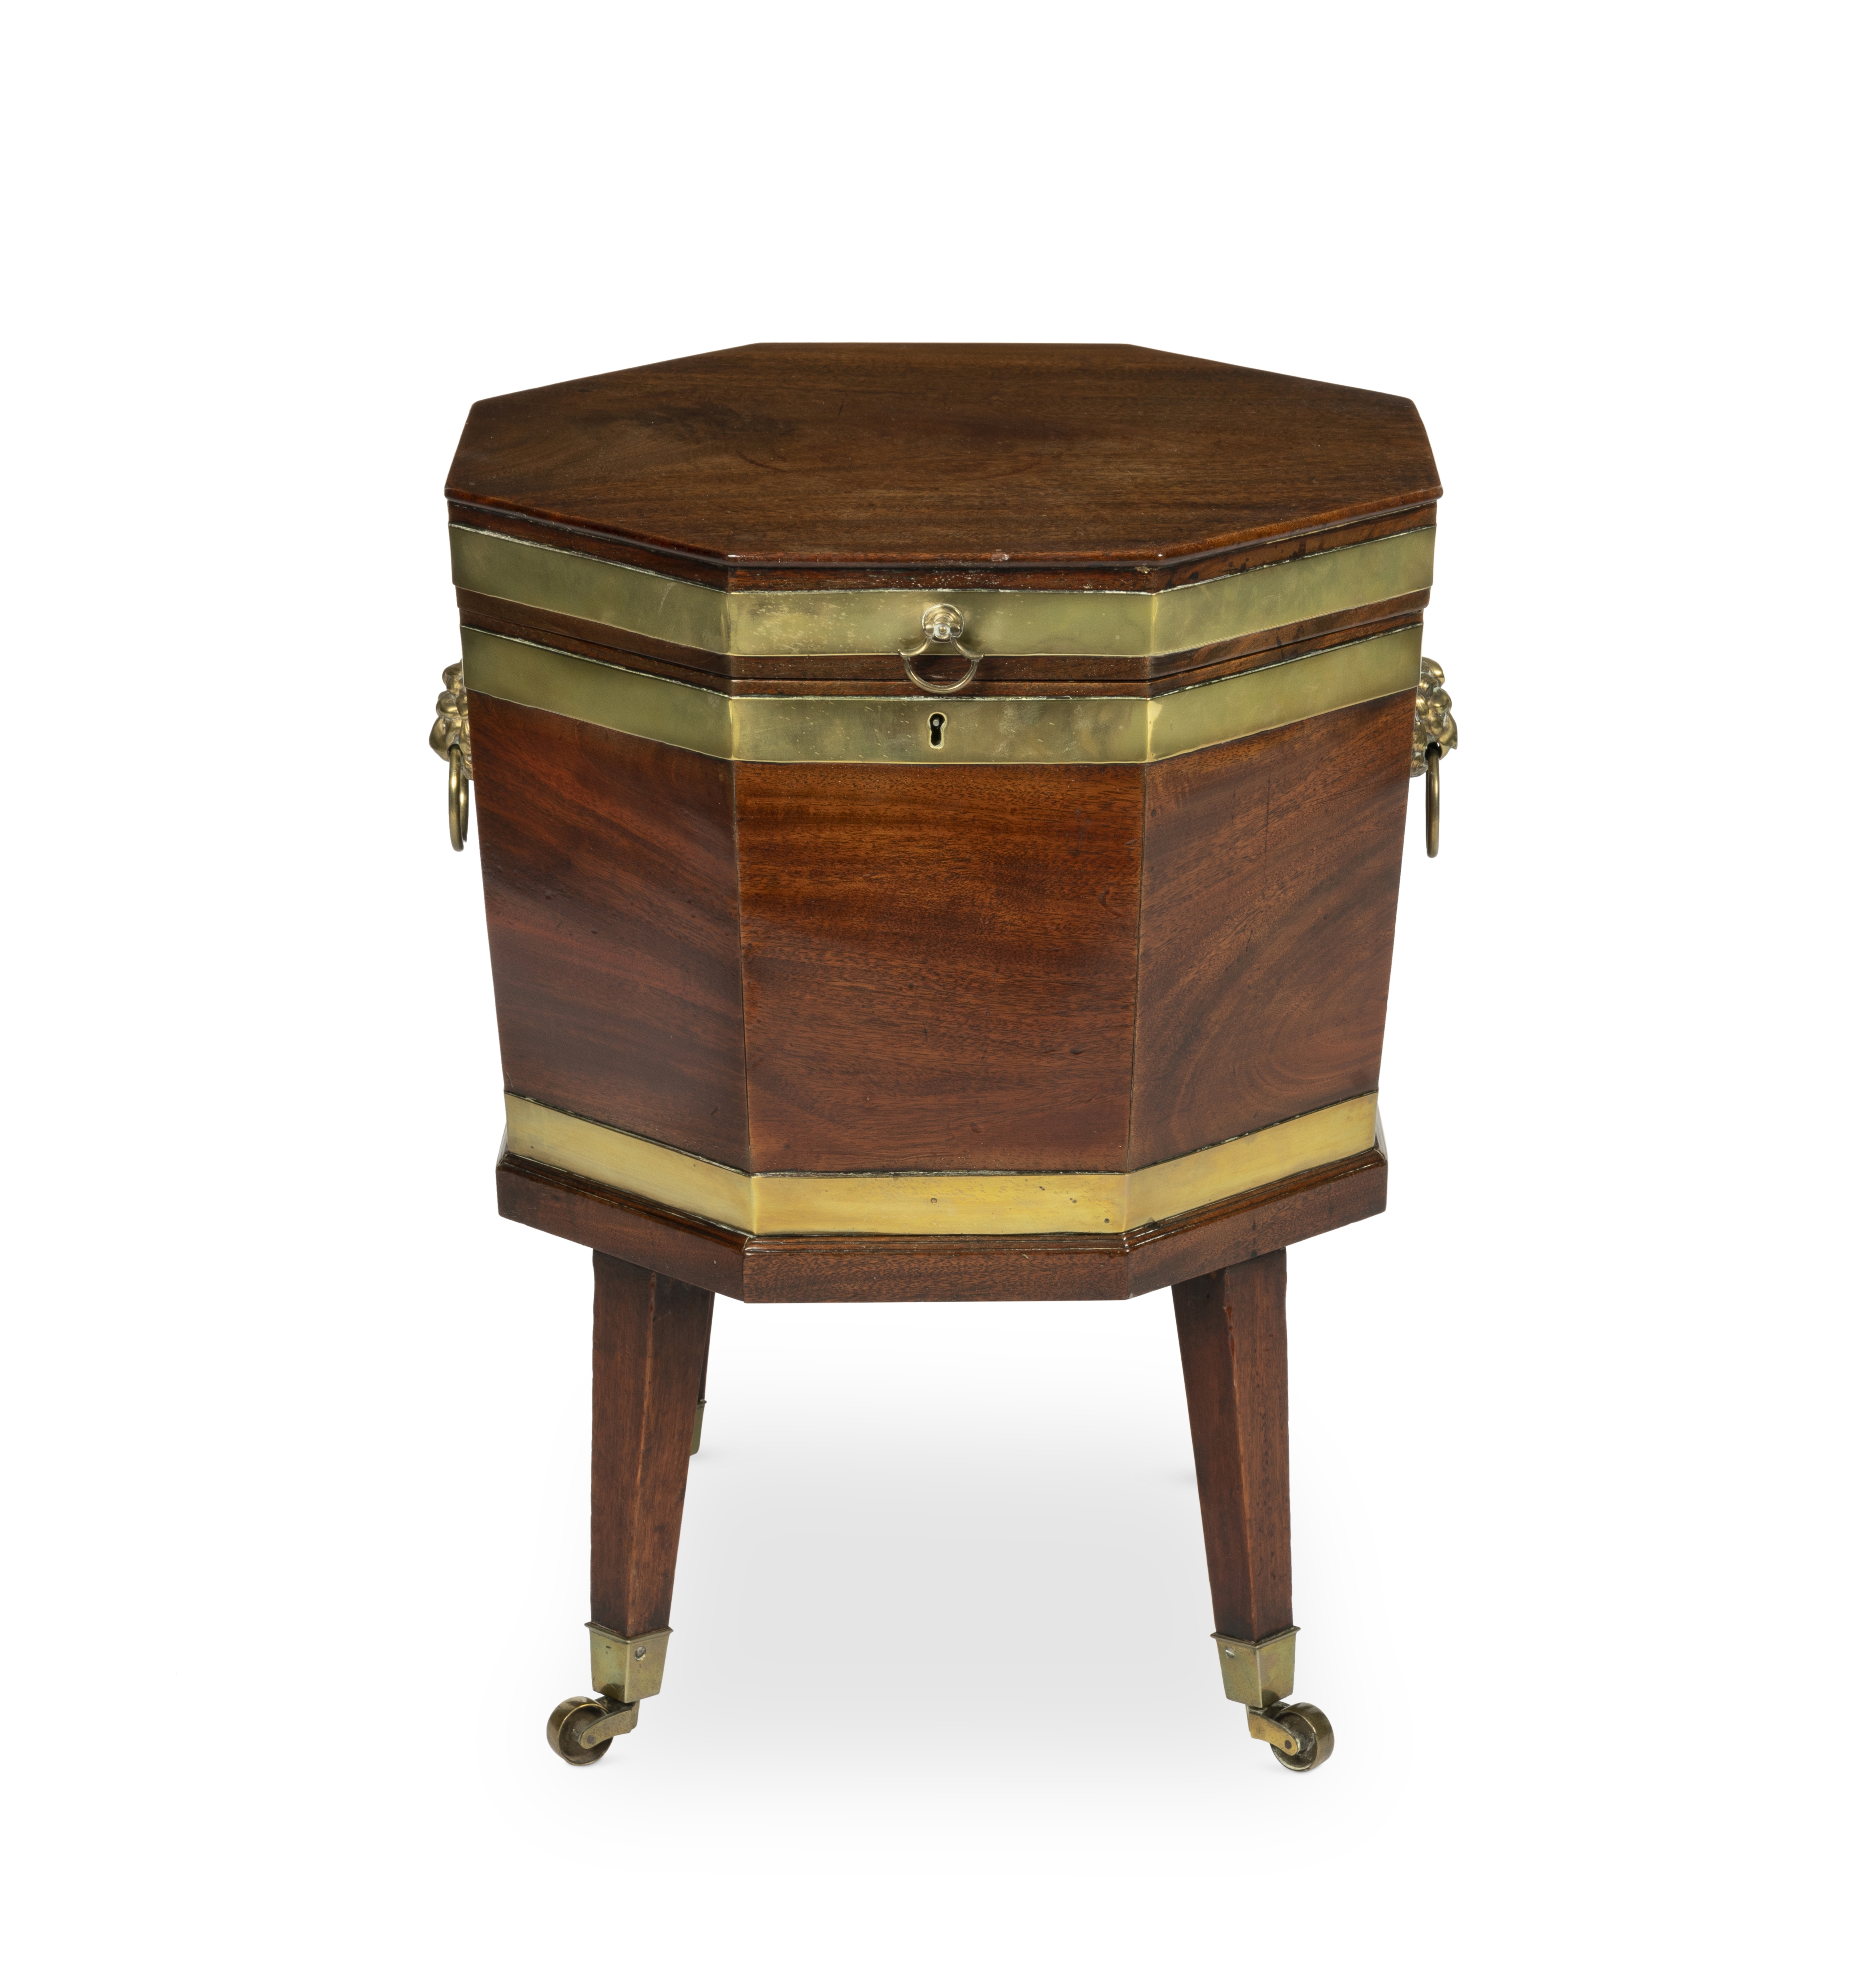 A George III mahogany and brass-bound octagonal cellaret